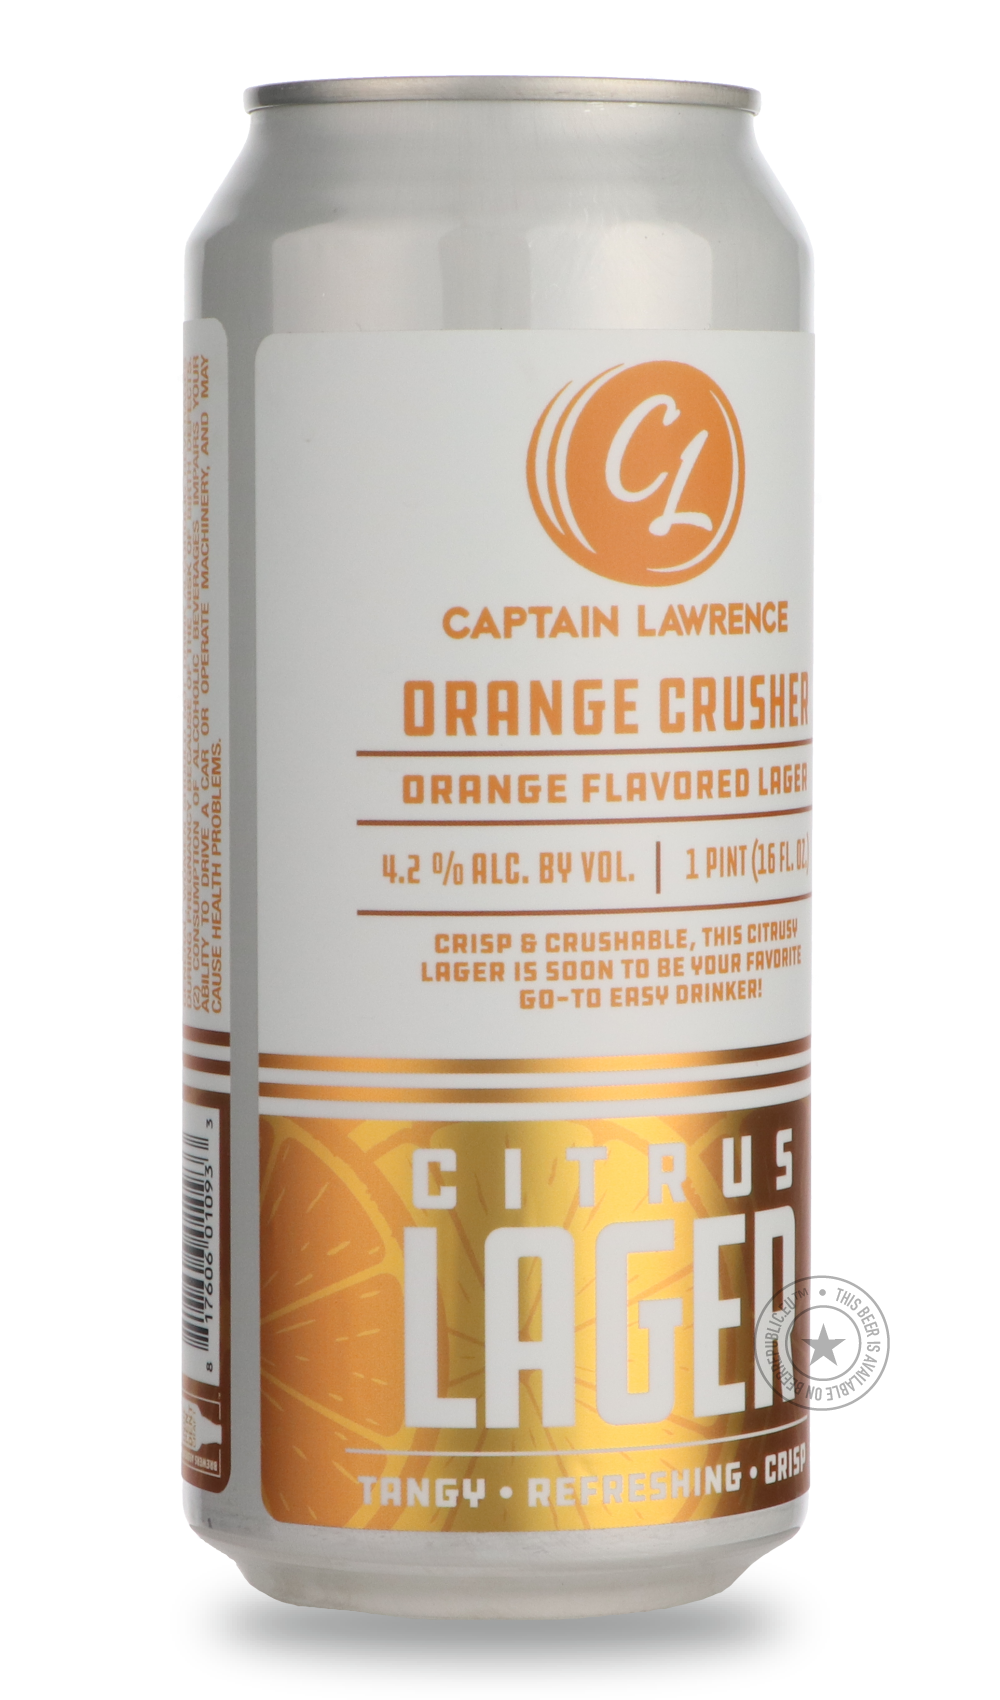 -Captain Lawrence- Orange Crusher-Pale- Only @ Beer Republic - The best online beer store for American & Canadian craft beer - Buy beer online from the USA and Canada - Bier online kopen - Amerikaans bier kopen - Craft beer store - Craft beer kopen - Amerikanisch bier kaufen - Bier online kaufen - Acheter biere online - IPA - Stout - Porter - New England IPA - Hazy IPA - Imperial Stout - Barrel Aged - Barrel Aged Imperial Stout - Brown - Dark beer - Blond - Blonde - Pilsner - Lager - Wheat - Weizen - Amber 